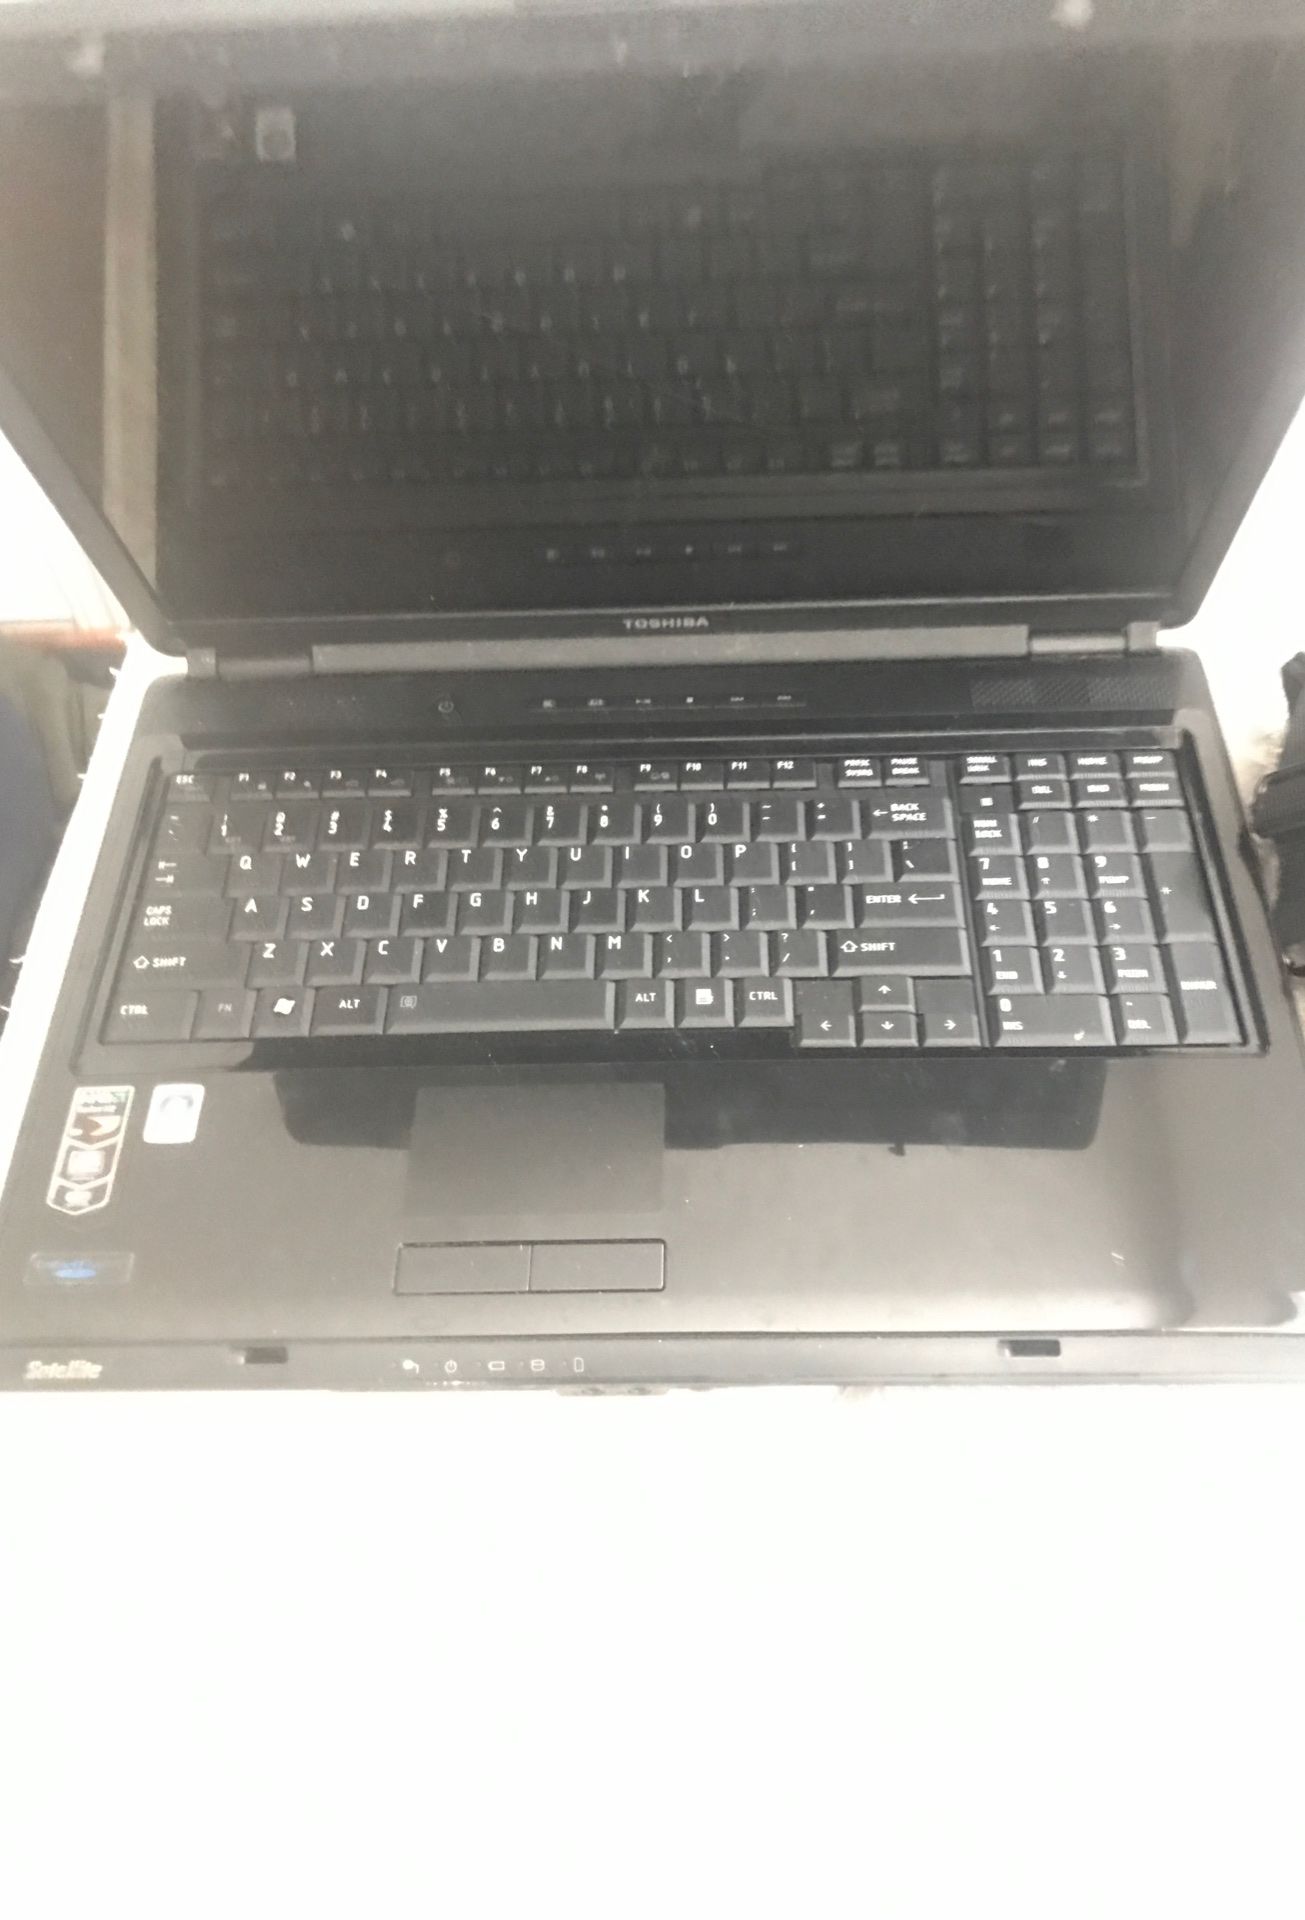 Toshiba laptop with traveling bag